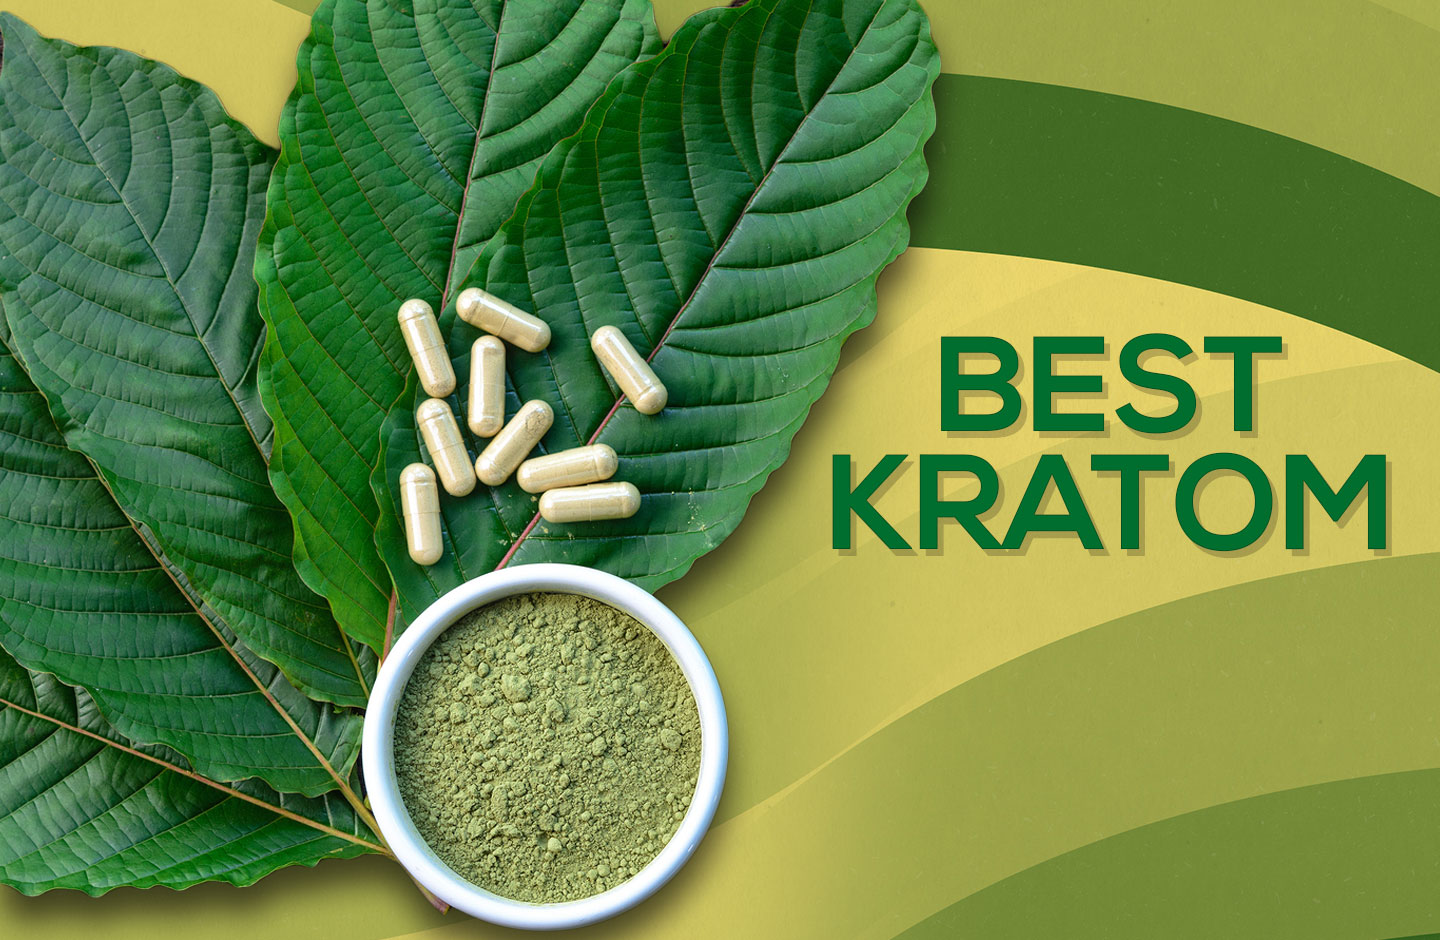 Kratom Online: A Comprehensive Guide to Purchasing and Using Kratom Safely